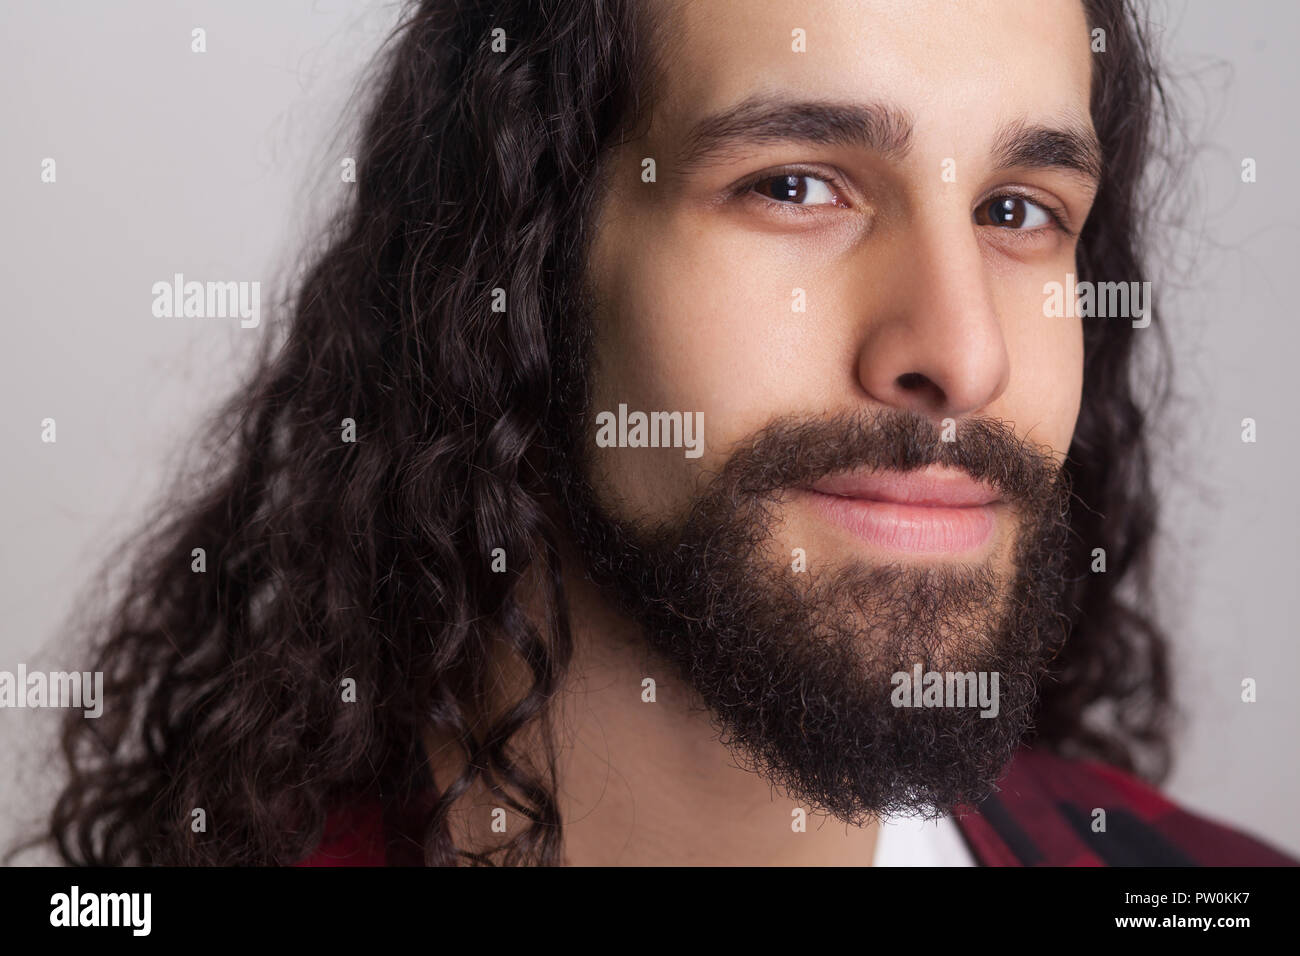 Closeup portrait of handsome confident man with black long curly hair and beard, looking at camera and smiling. male healthcare and beauty concept. in Stock Photo